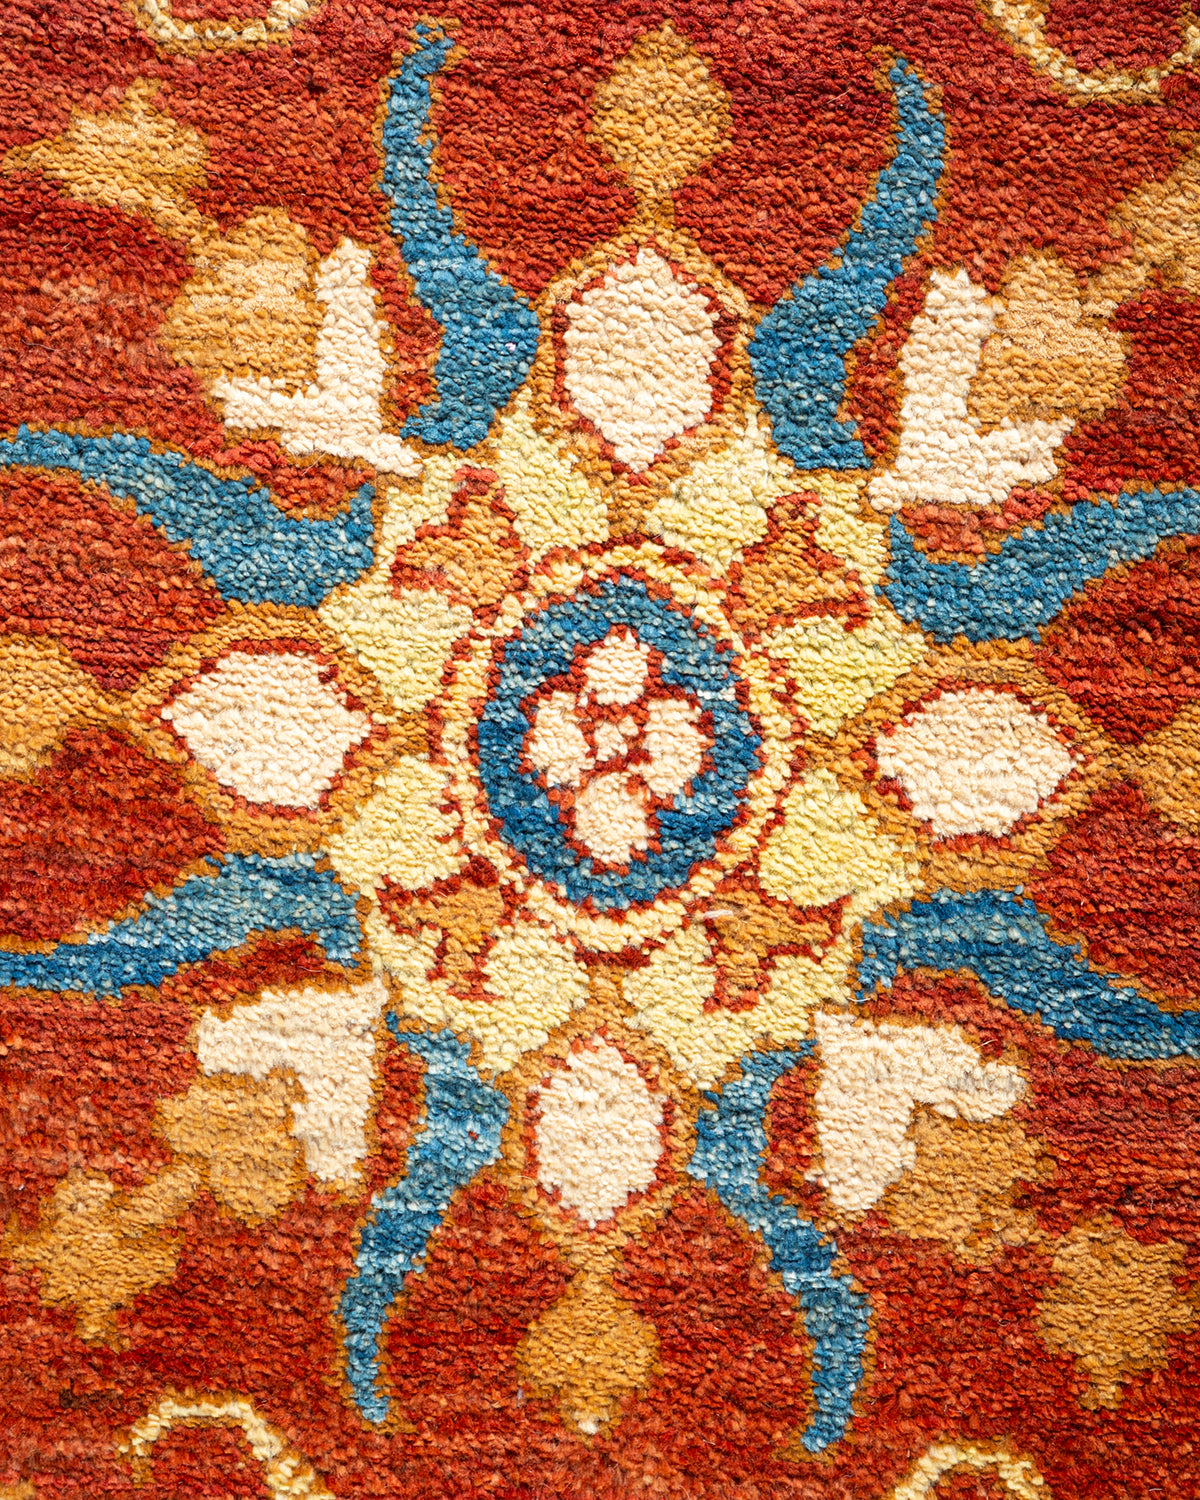 Eclectic, One-of-a-Kind Hand-Knotted Area Rug  - Orange,  8' 2" x 9' 10"